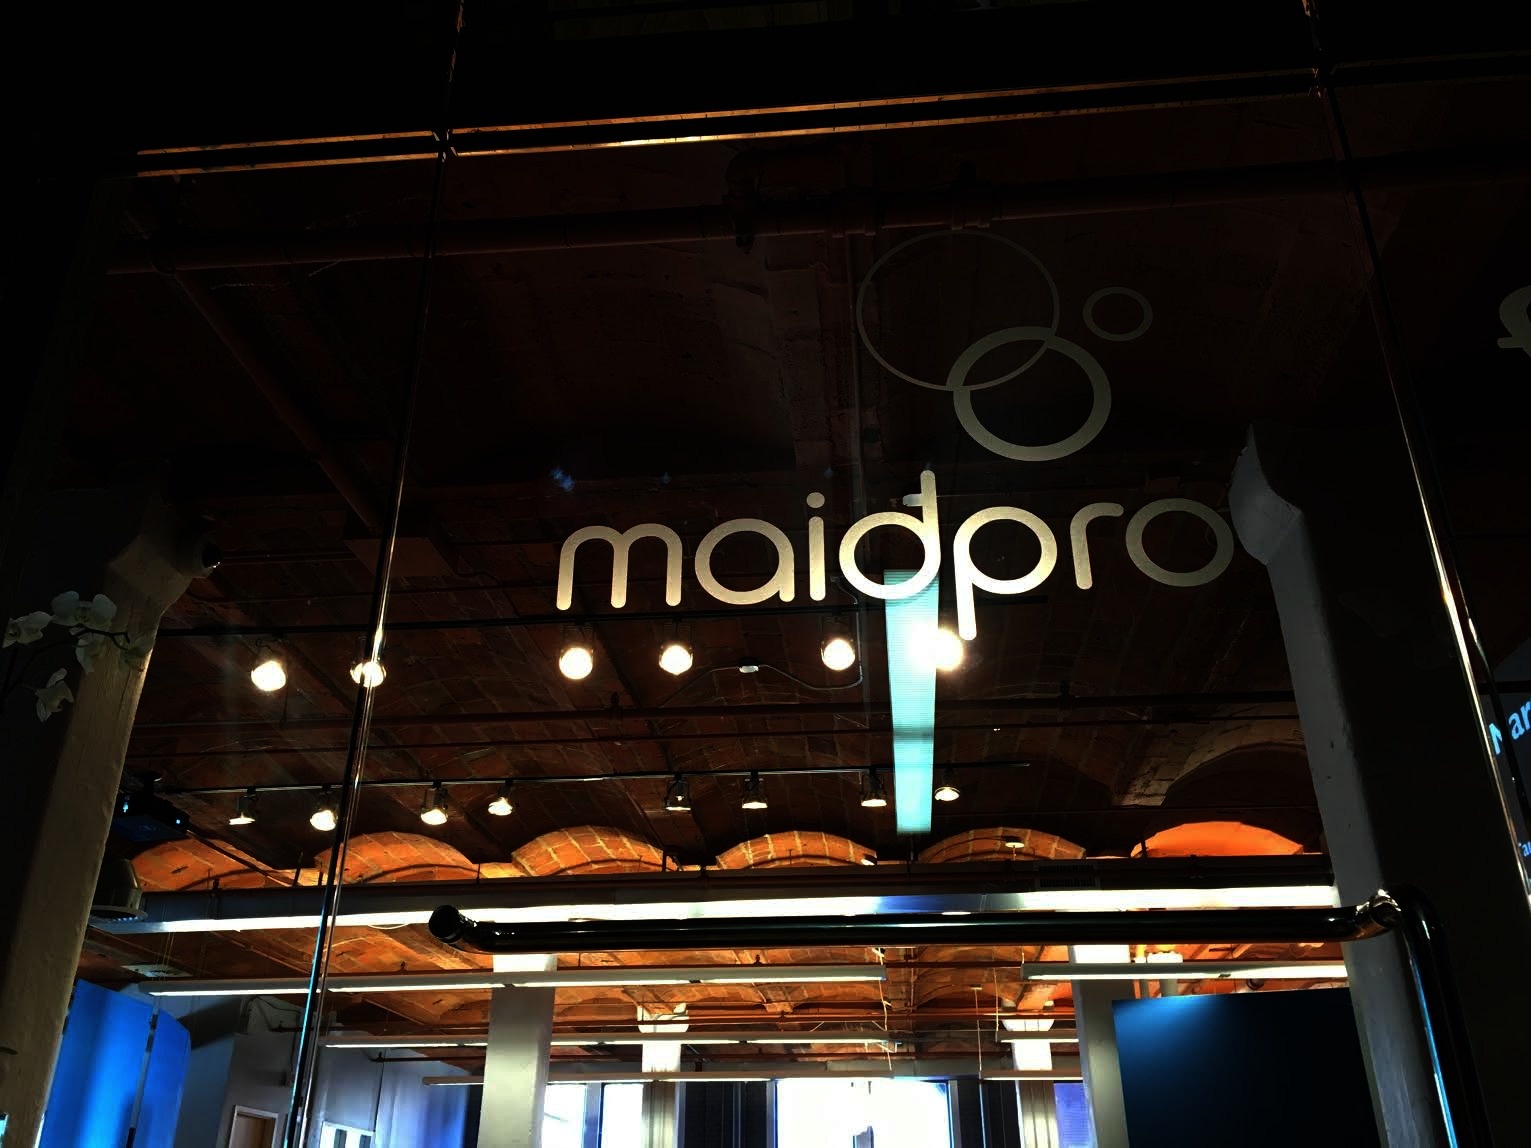 Welcome to MaidPro